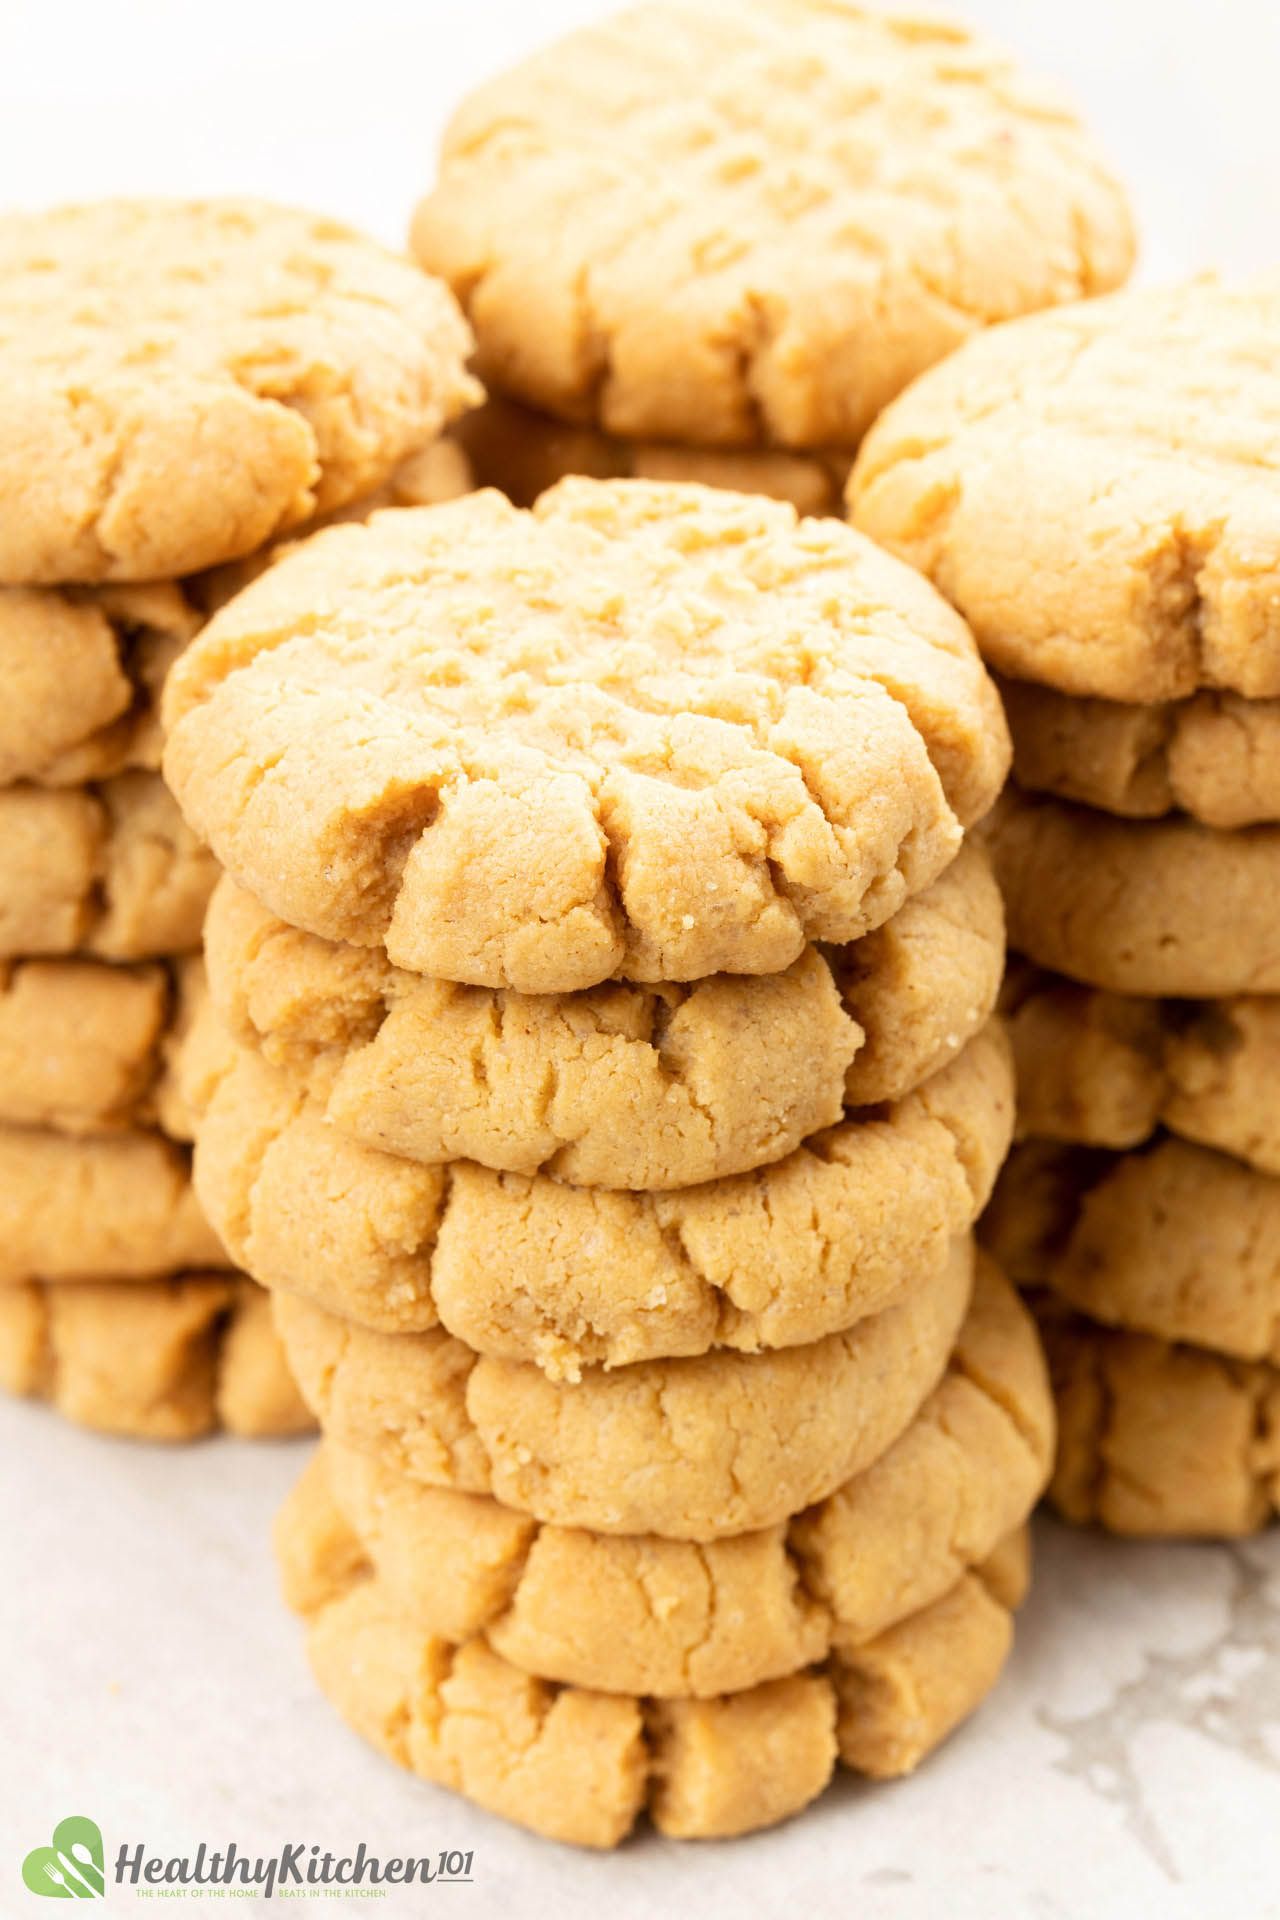 are peanut butter cookie healthy